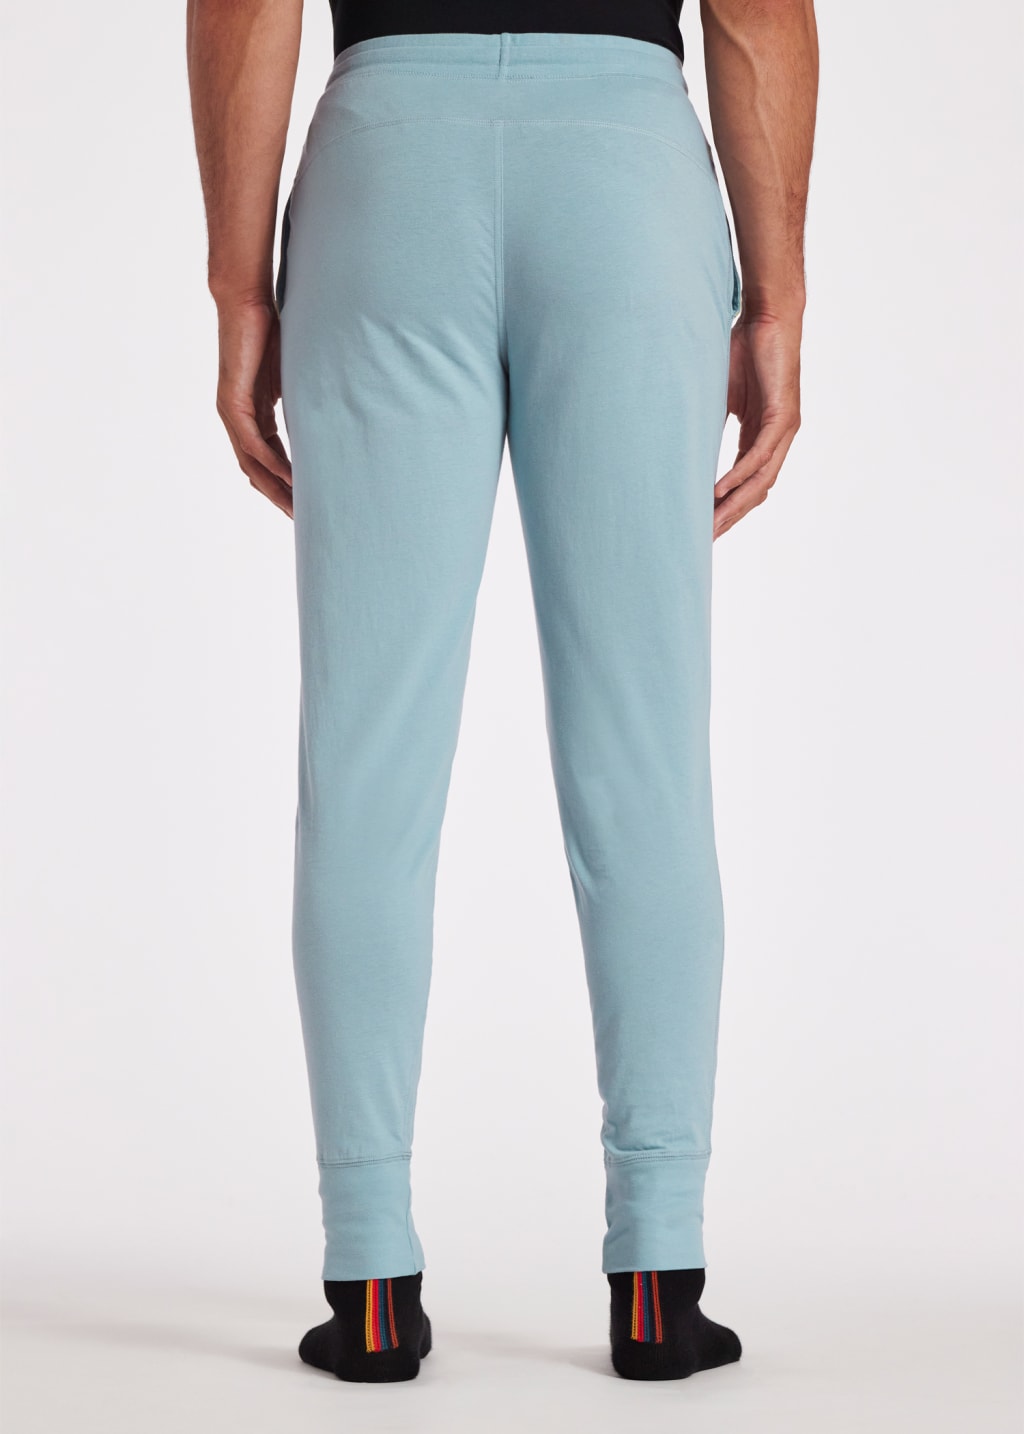 Model View - Baby Blue Jersey Lounge Pants Paul Smith